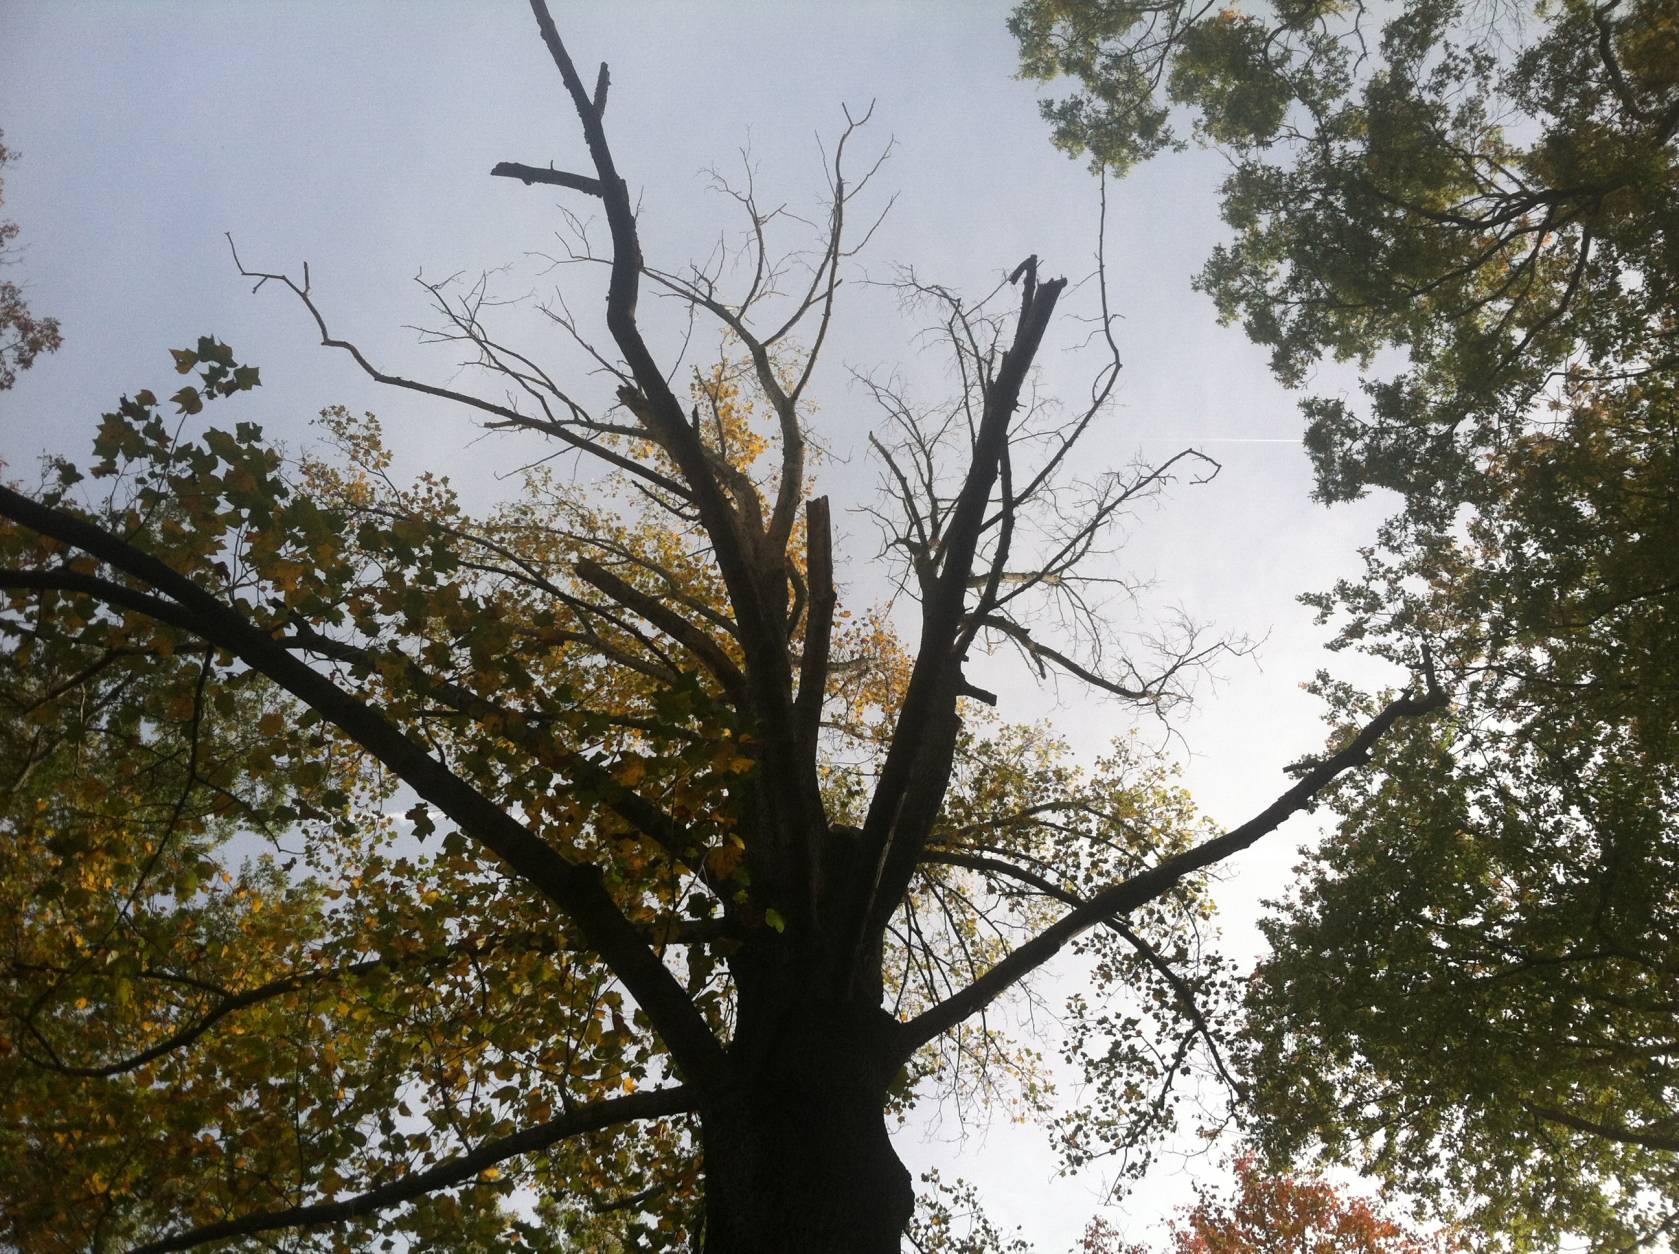 The pictured dead branches that are more than 2 inches wide indicate this tree in Burtonsville, Maryland, may be dying. (WTOP/Sae Robinson)